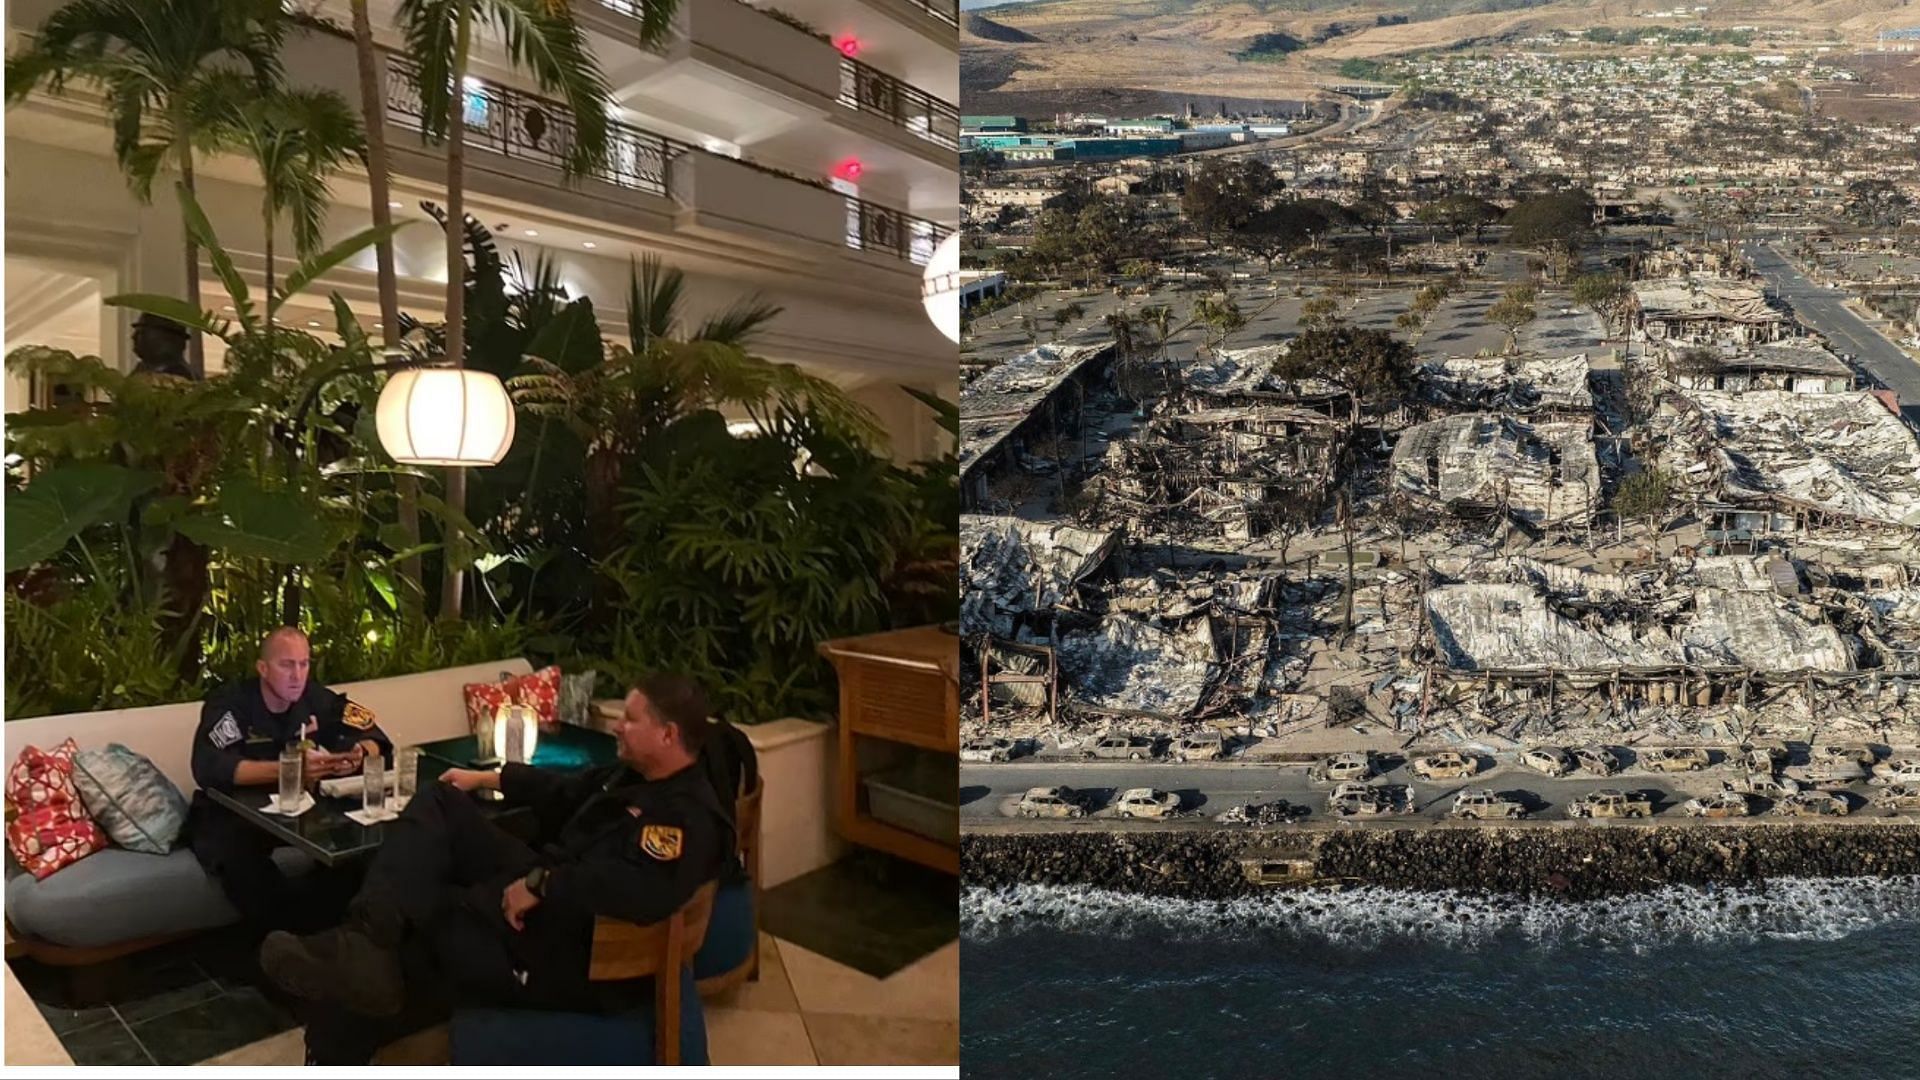 FEMA officials serving in Maui are staying at luxury hotels and resorts. (Image via X/Julia)